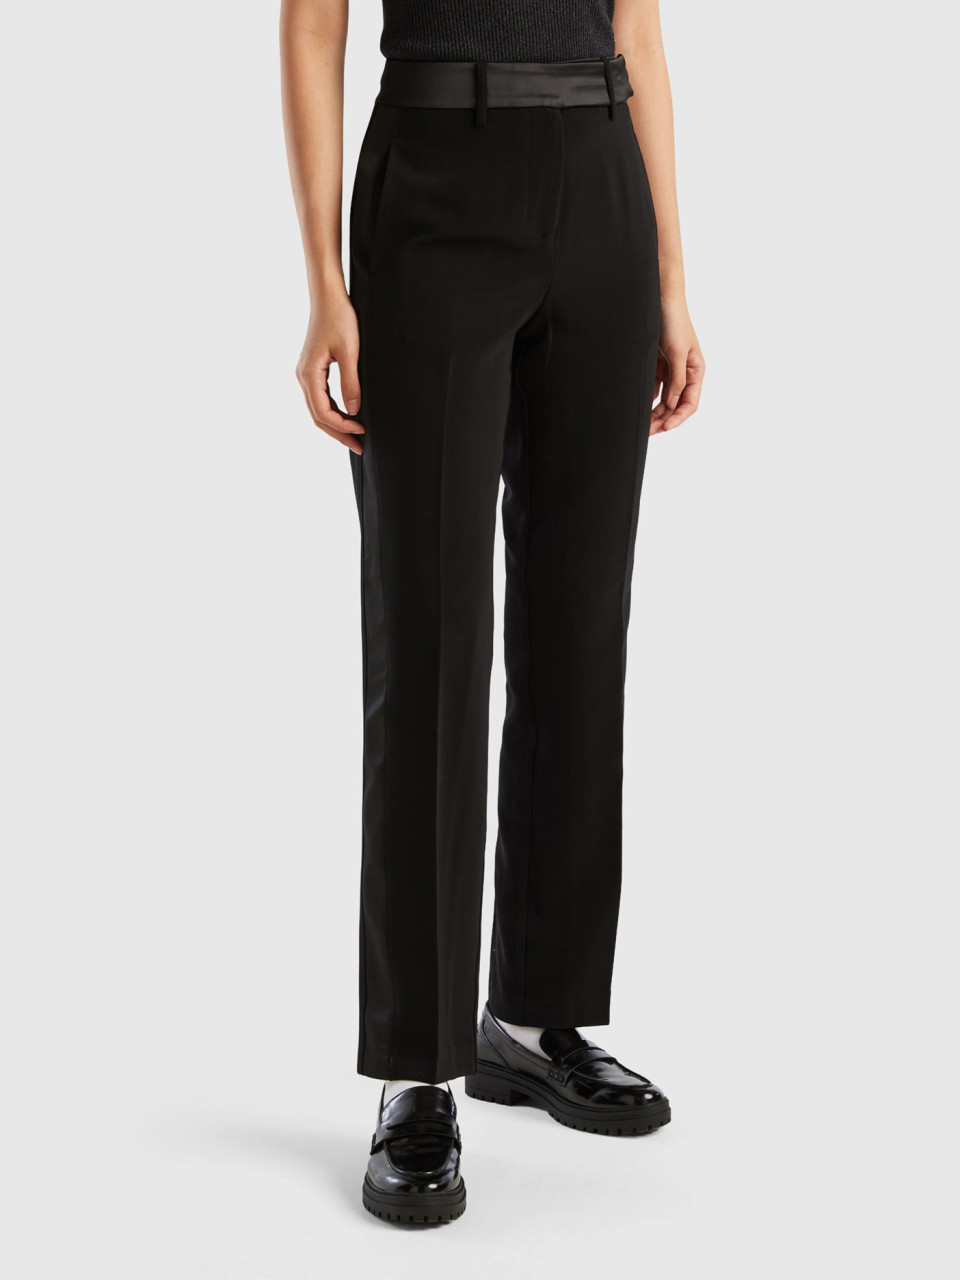 Benetton, Trousers With Satin Details, Black, Women